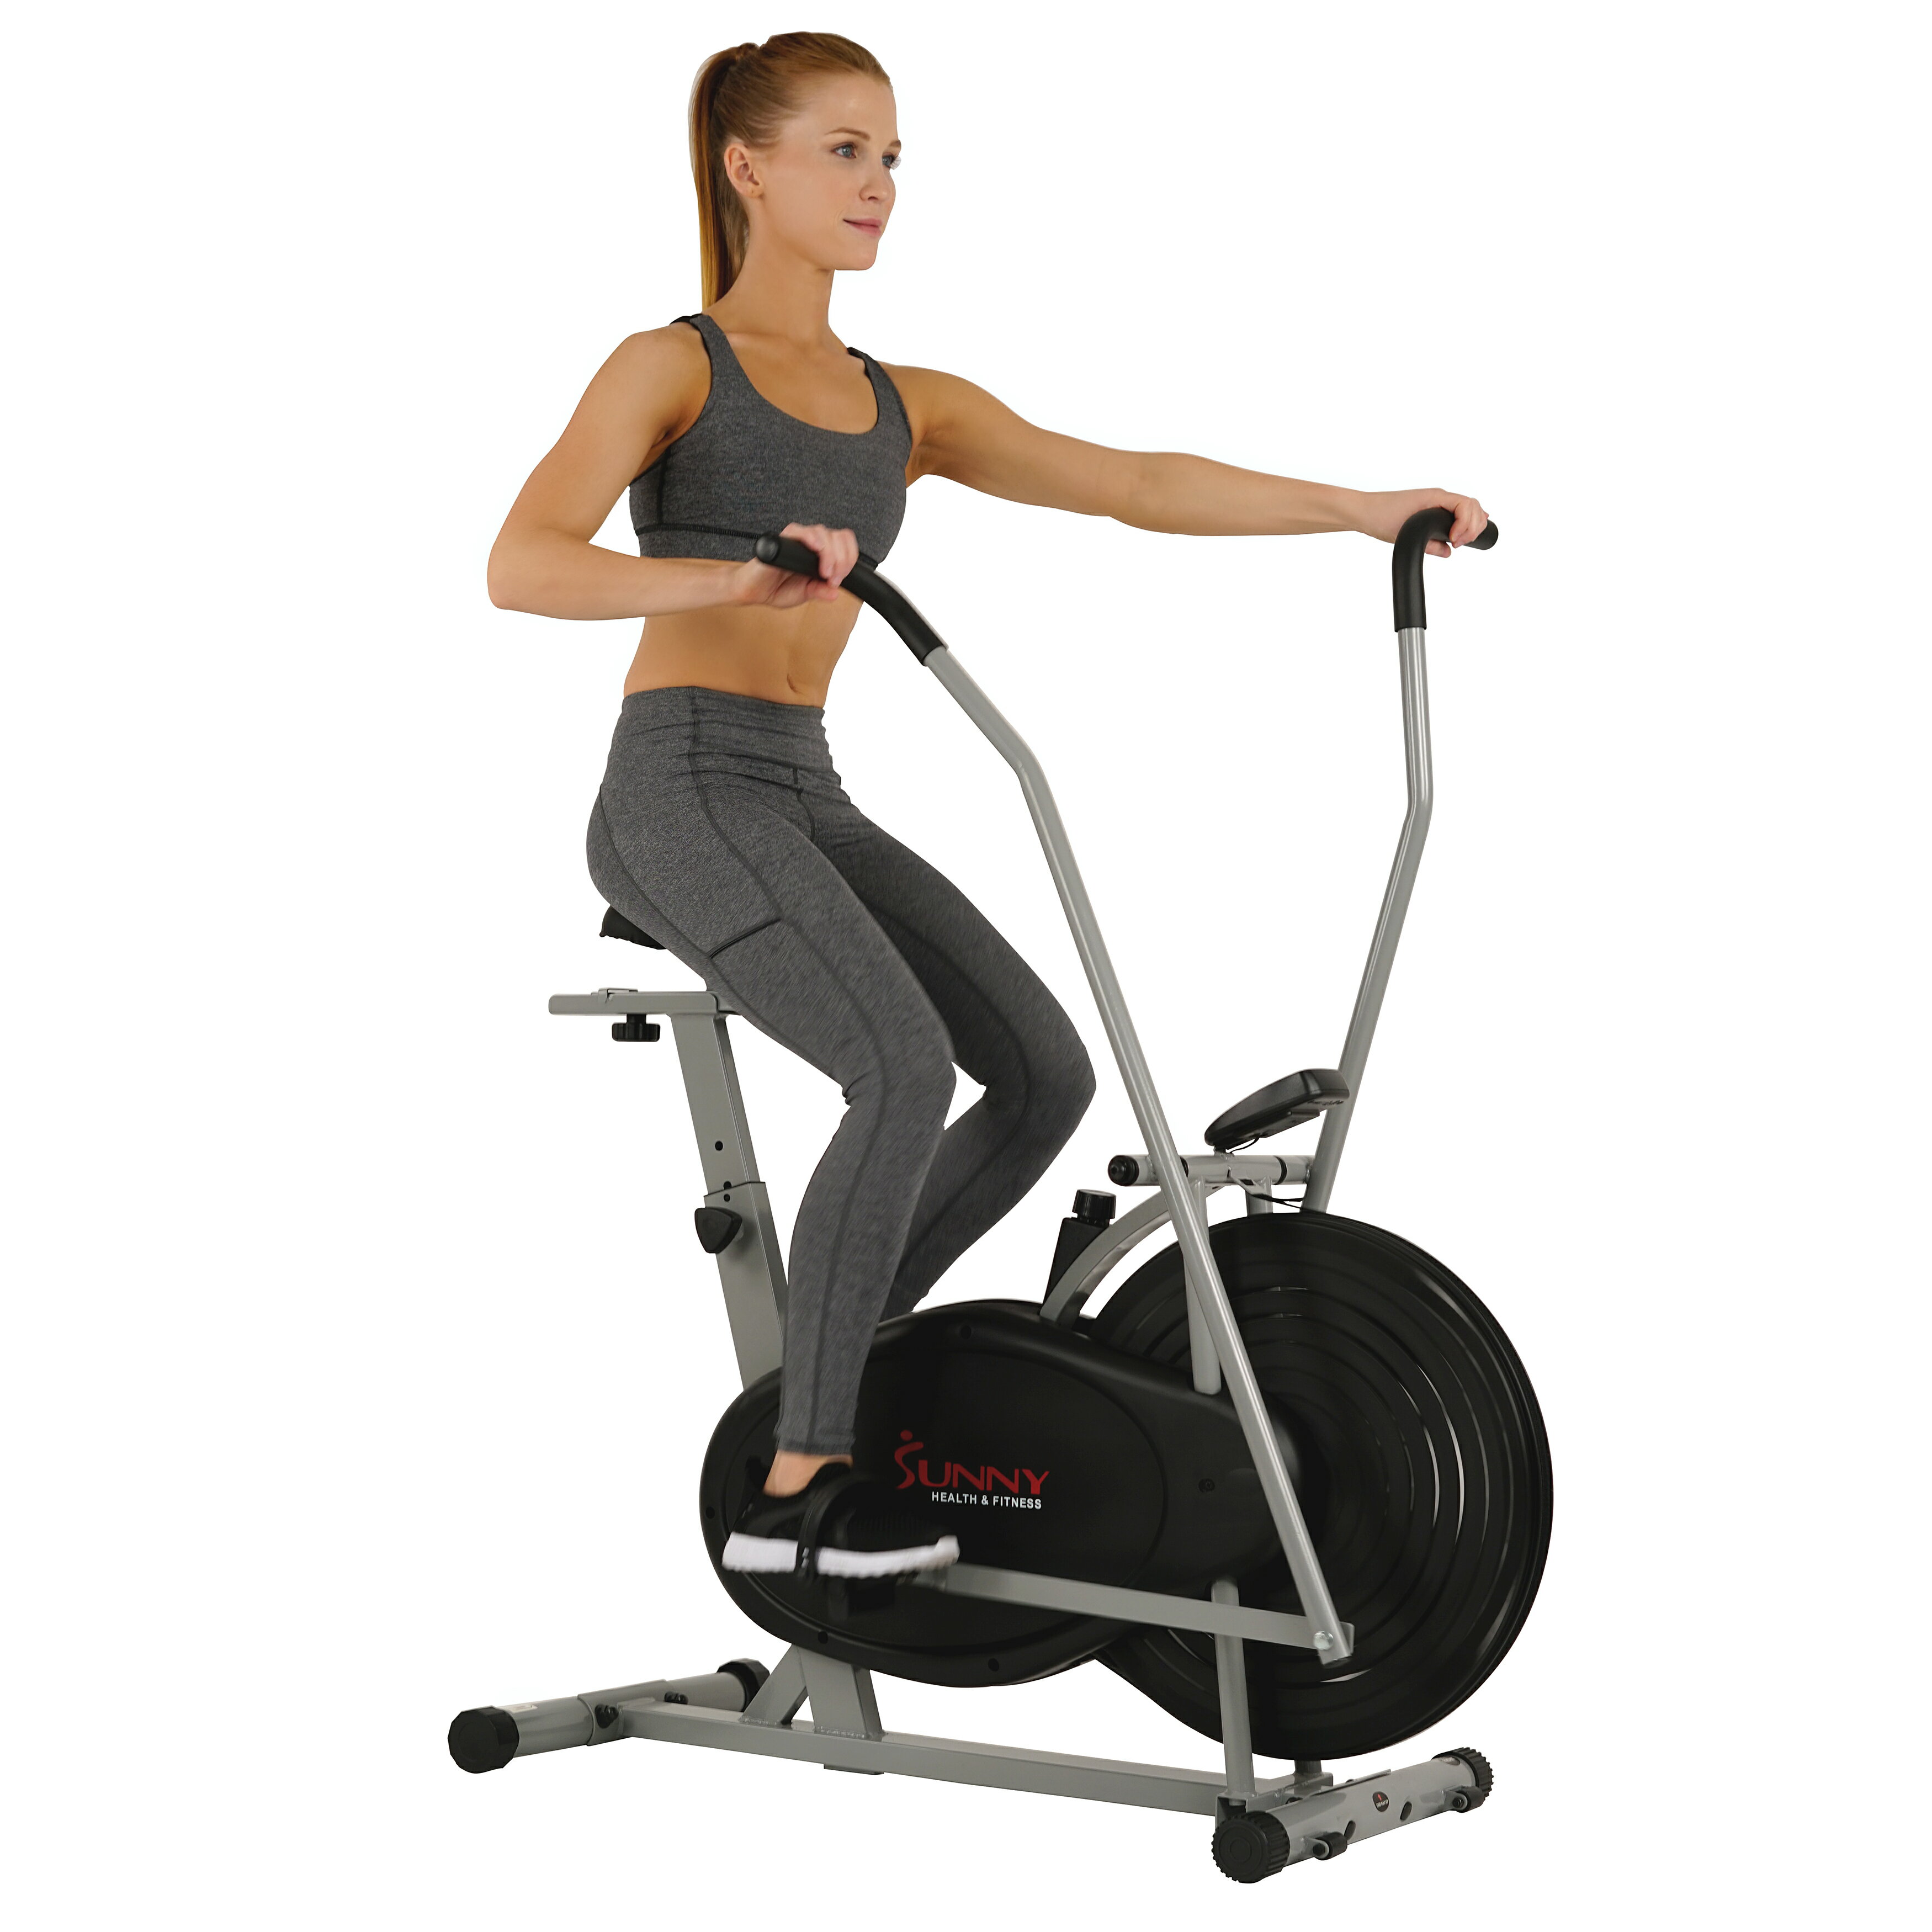 30 Minute Exercise bike with arm workout for Women